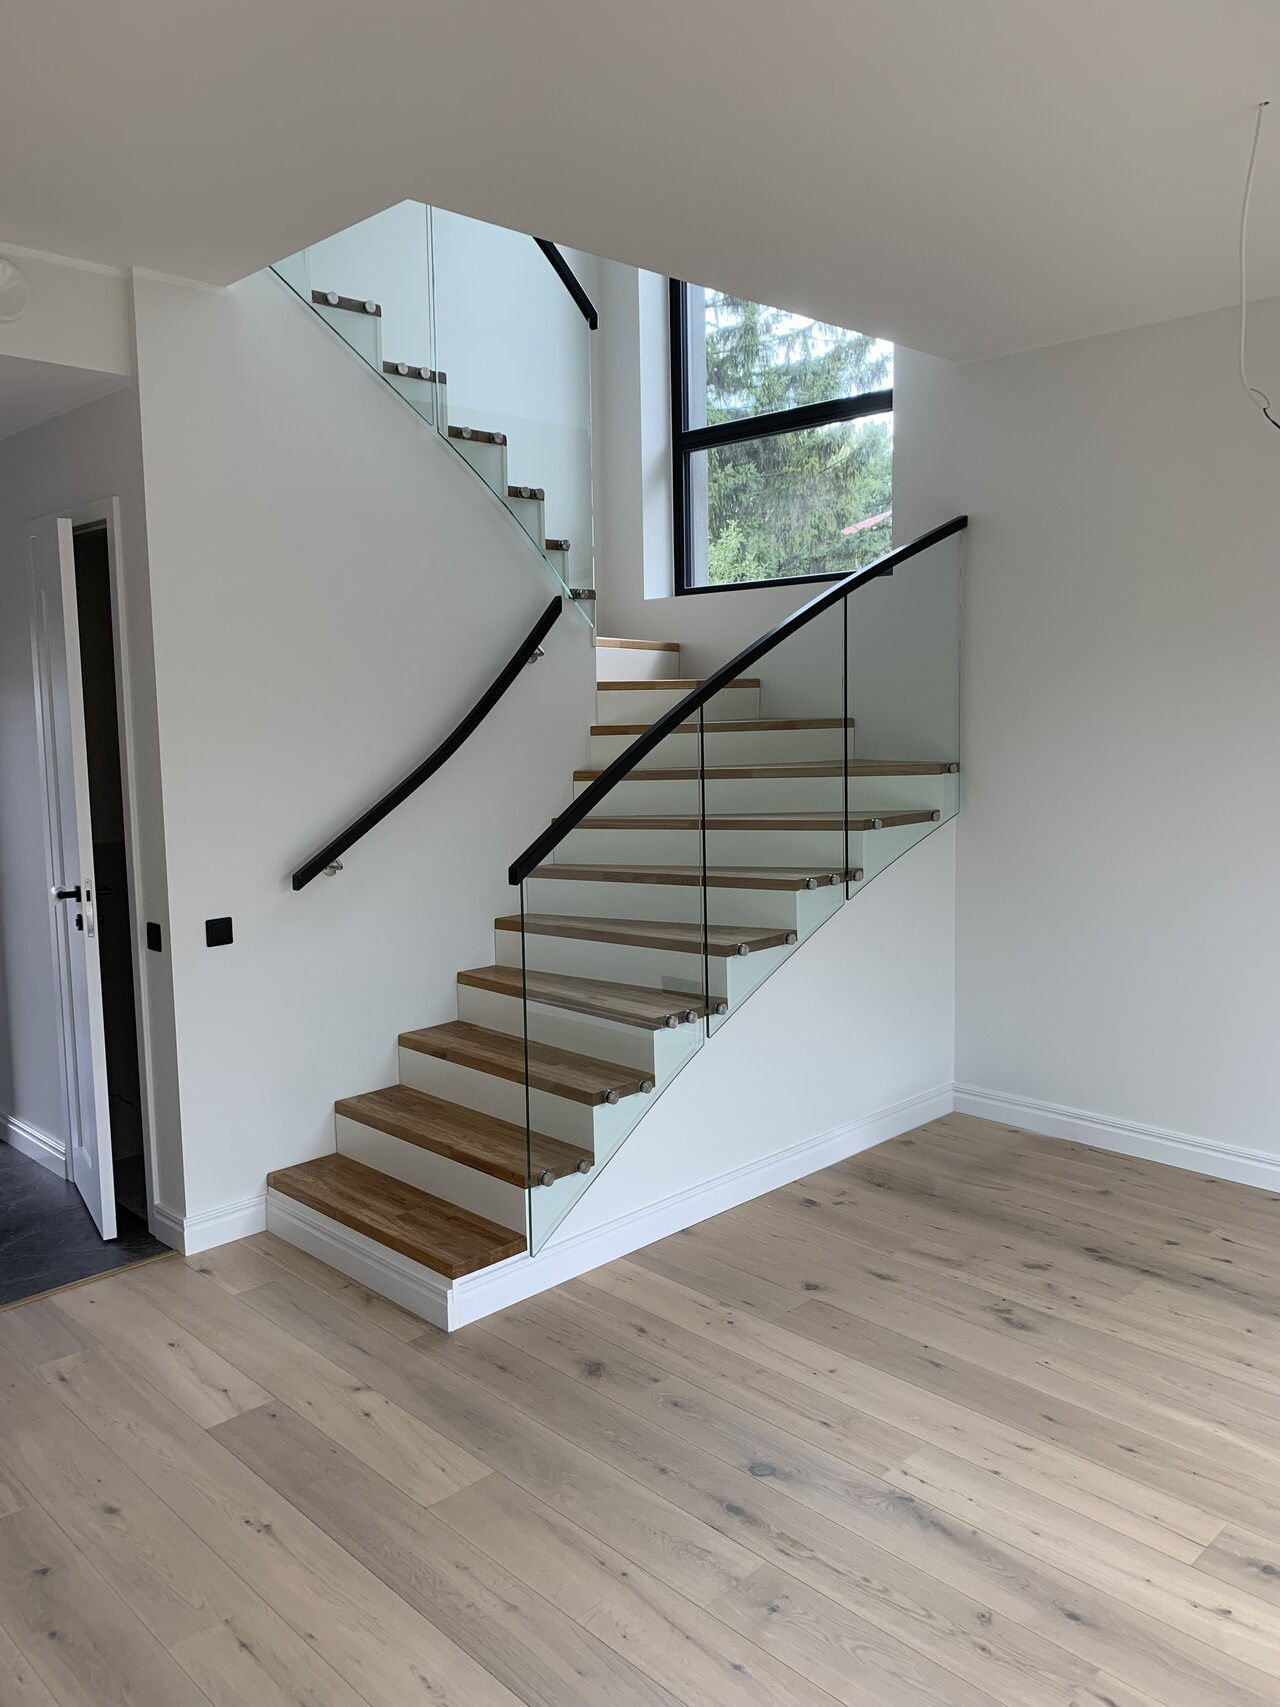 15. Design staircase with glass railing